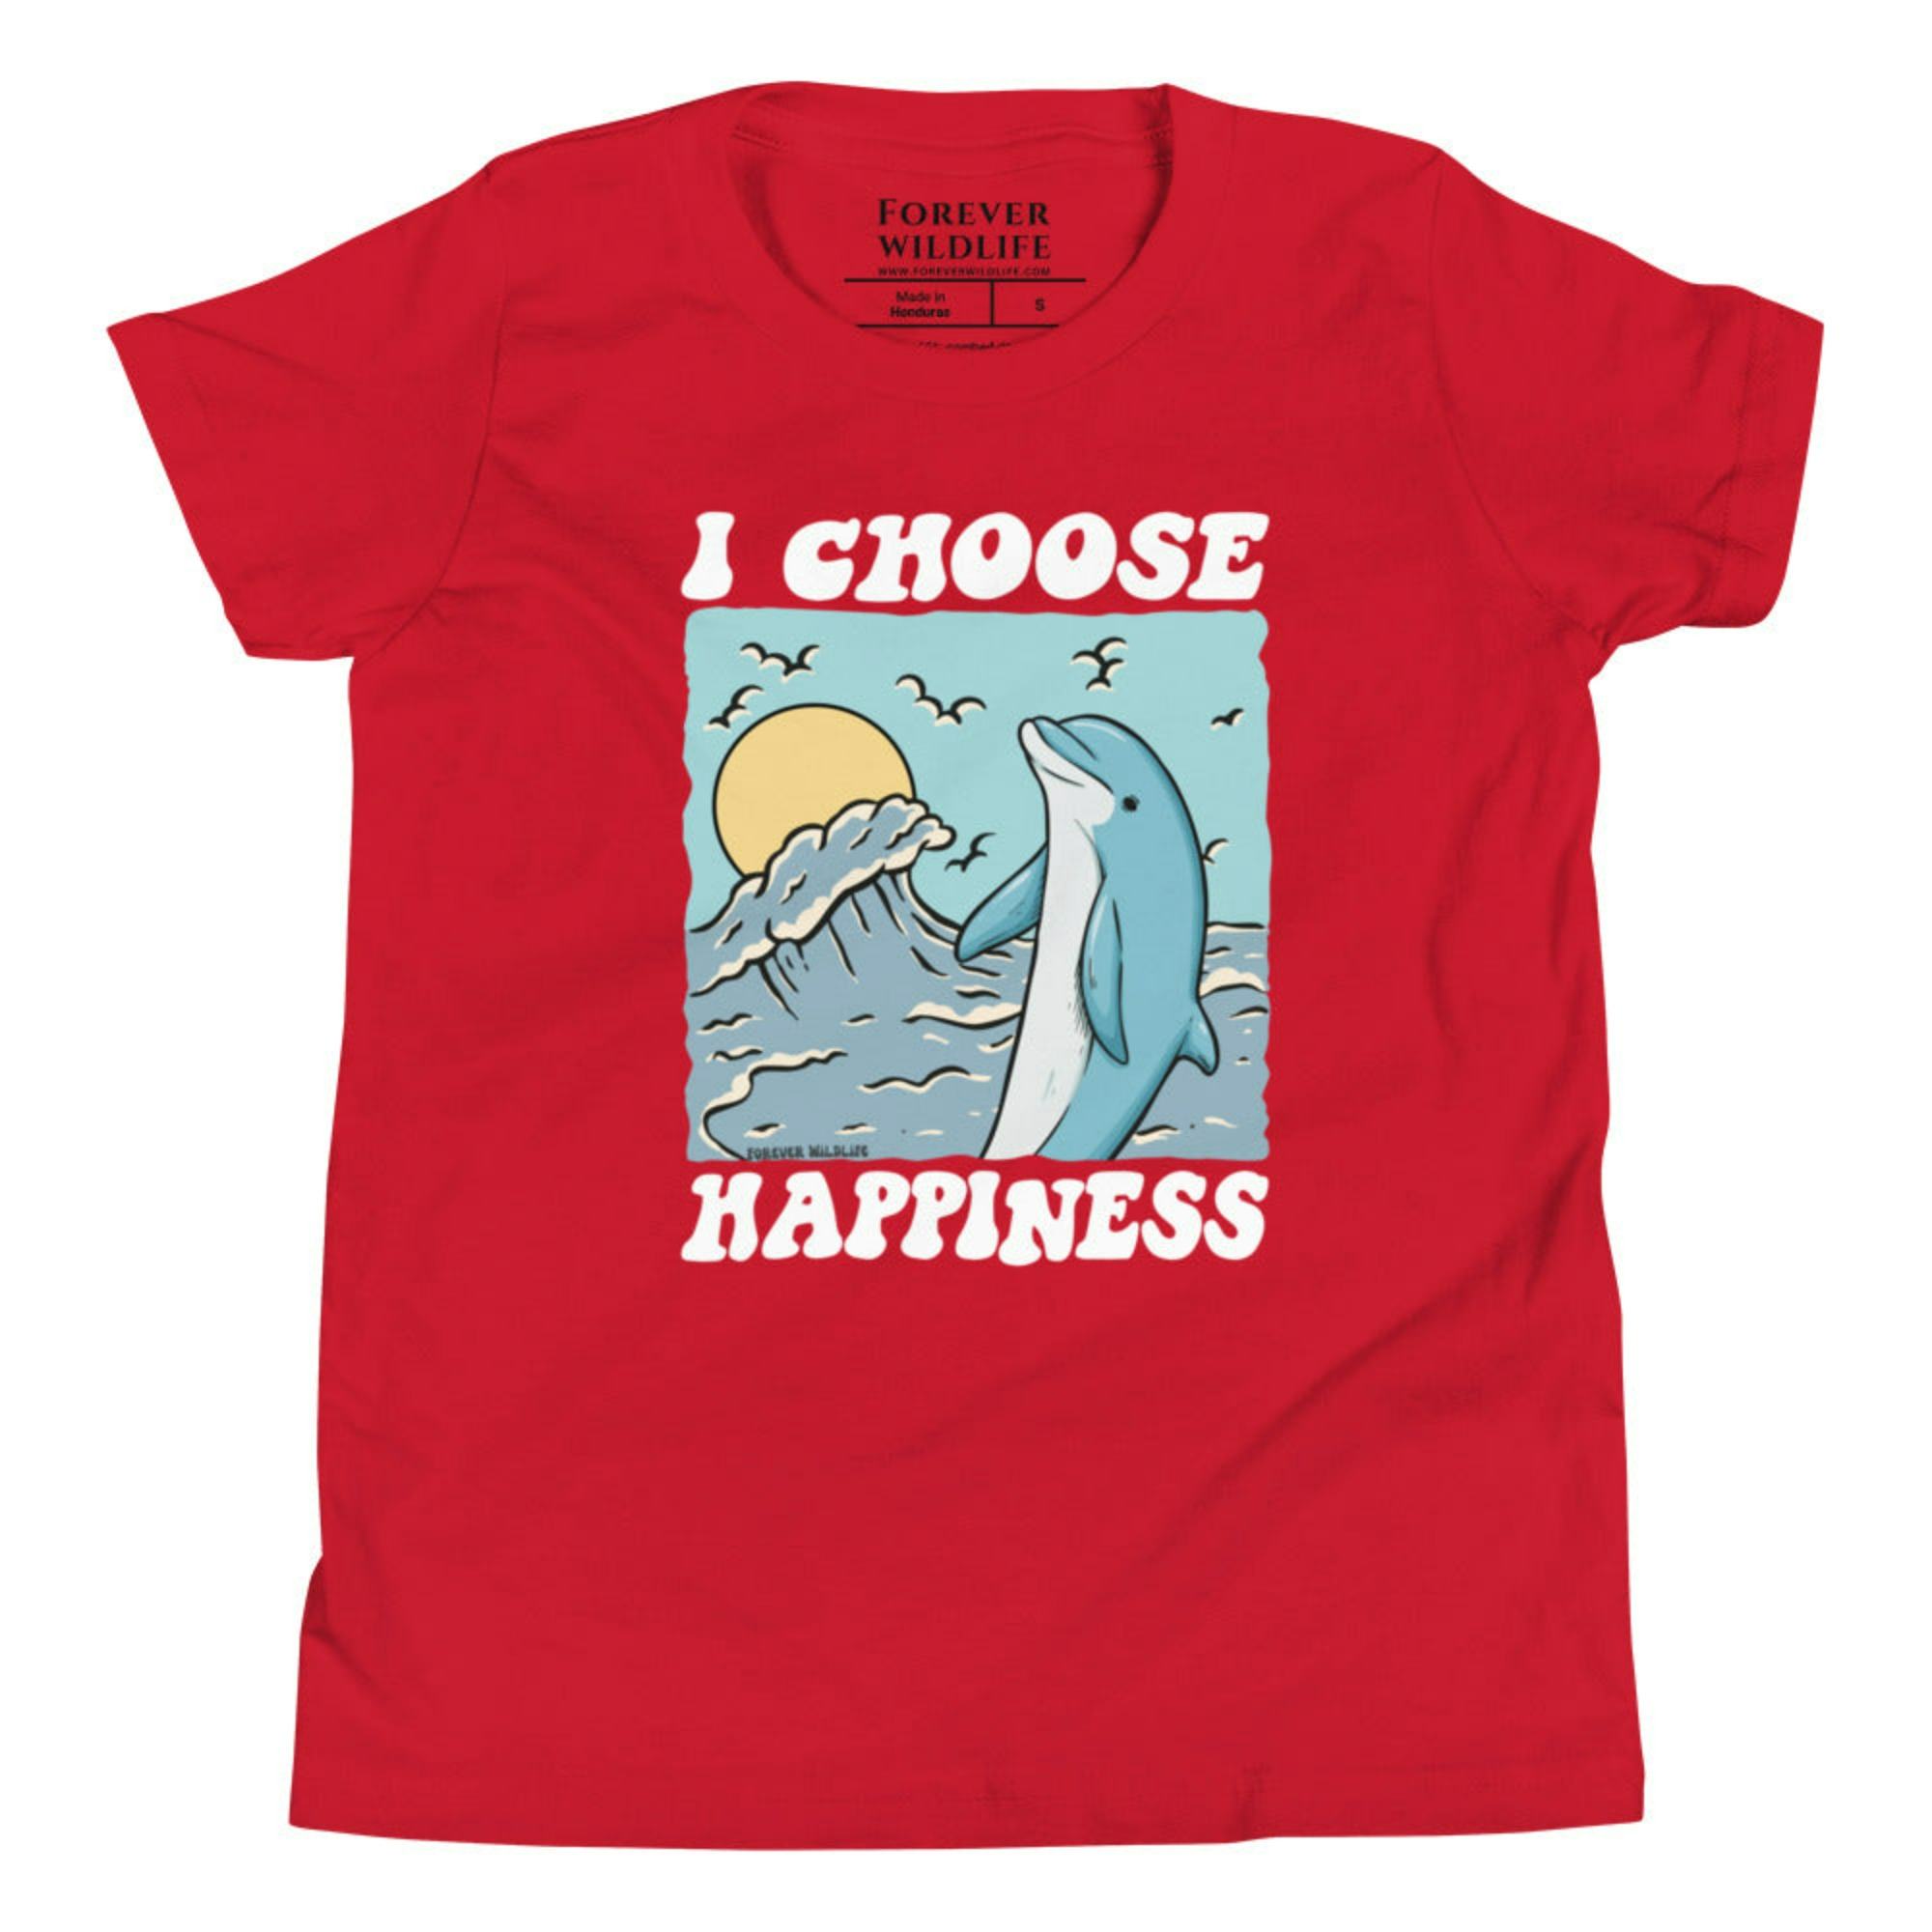 Red Dolphin Youth T-Shirt with dolphin graphic as part of Wildlife T-Shirts, Wildlife Clothing & Apparel by Forever Wildlife